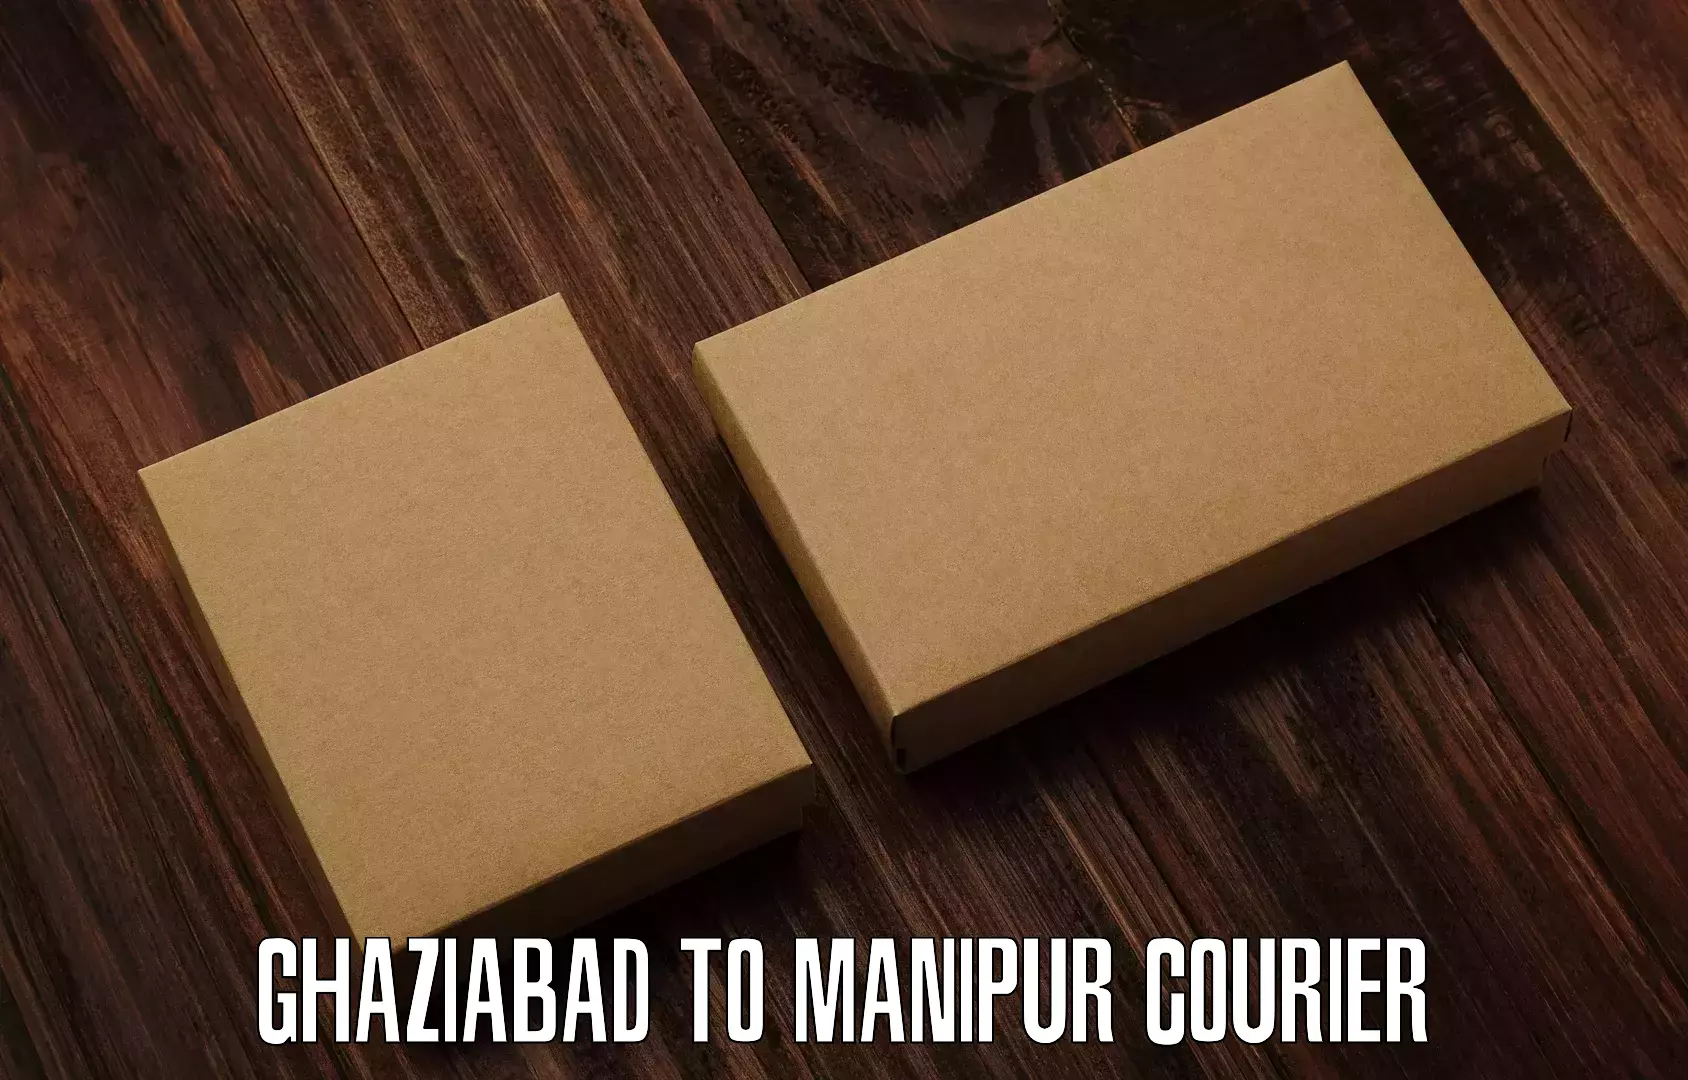 User-friendly delivery service Ghaziabad to Manipur